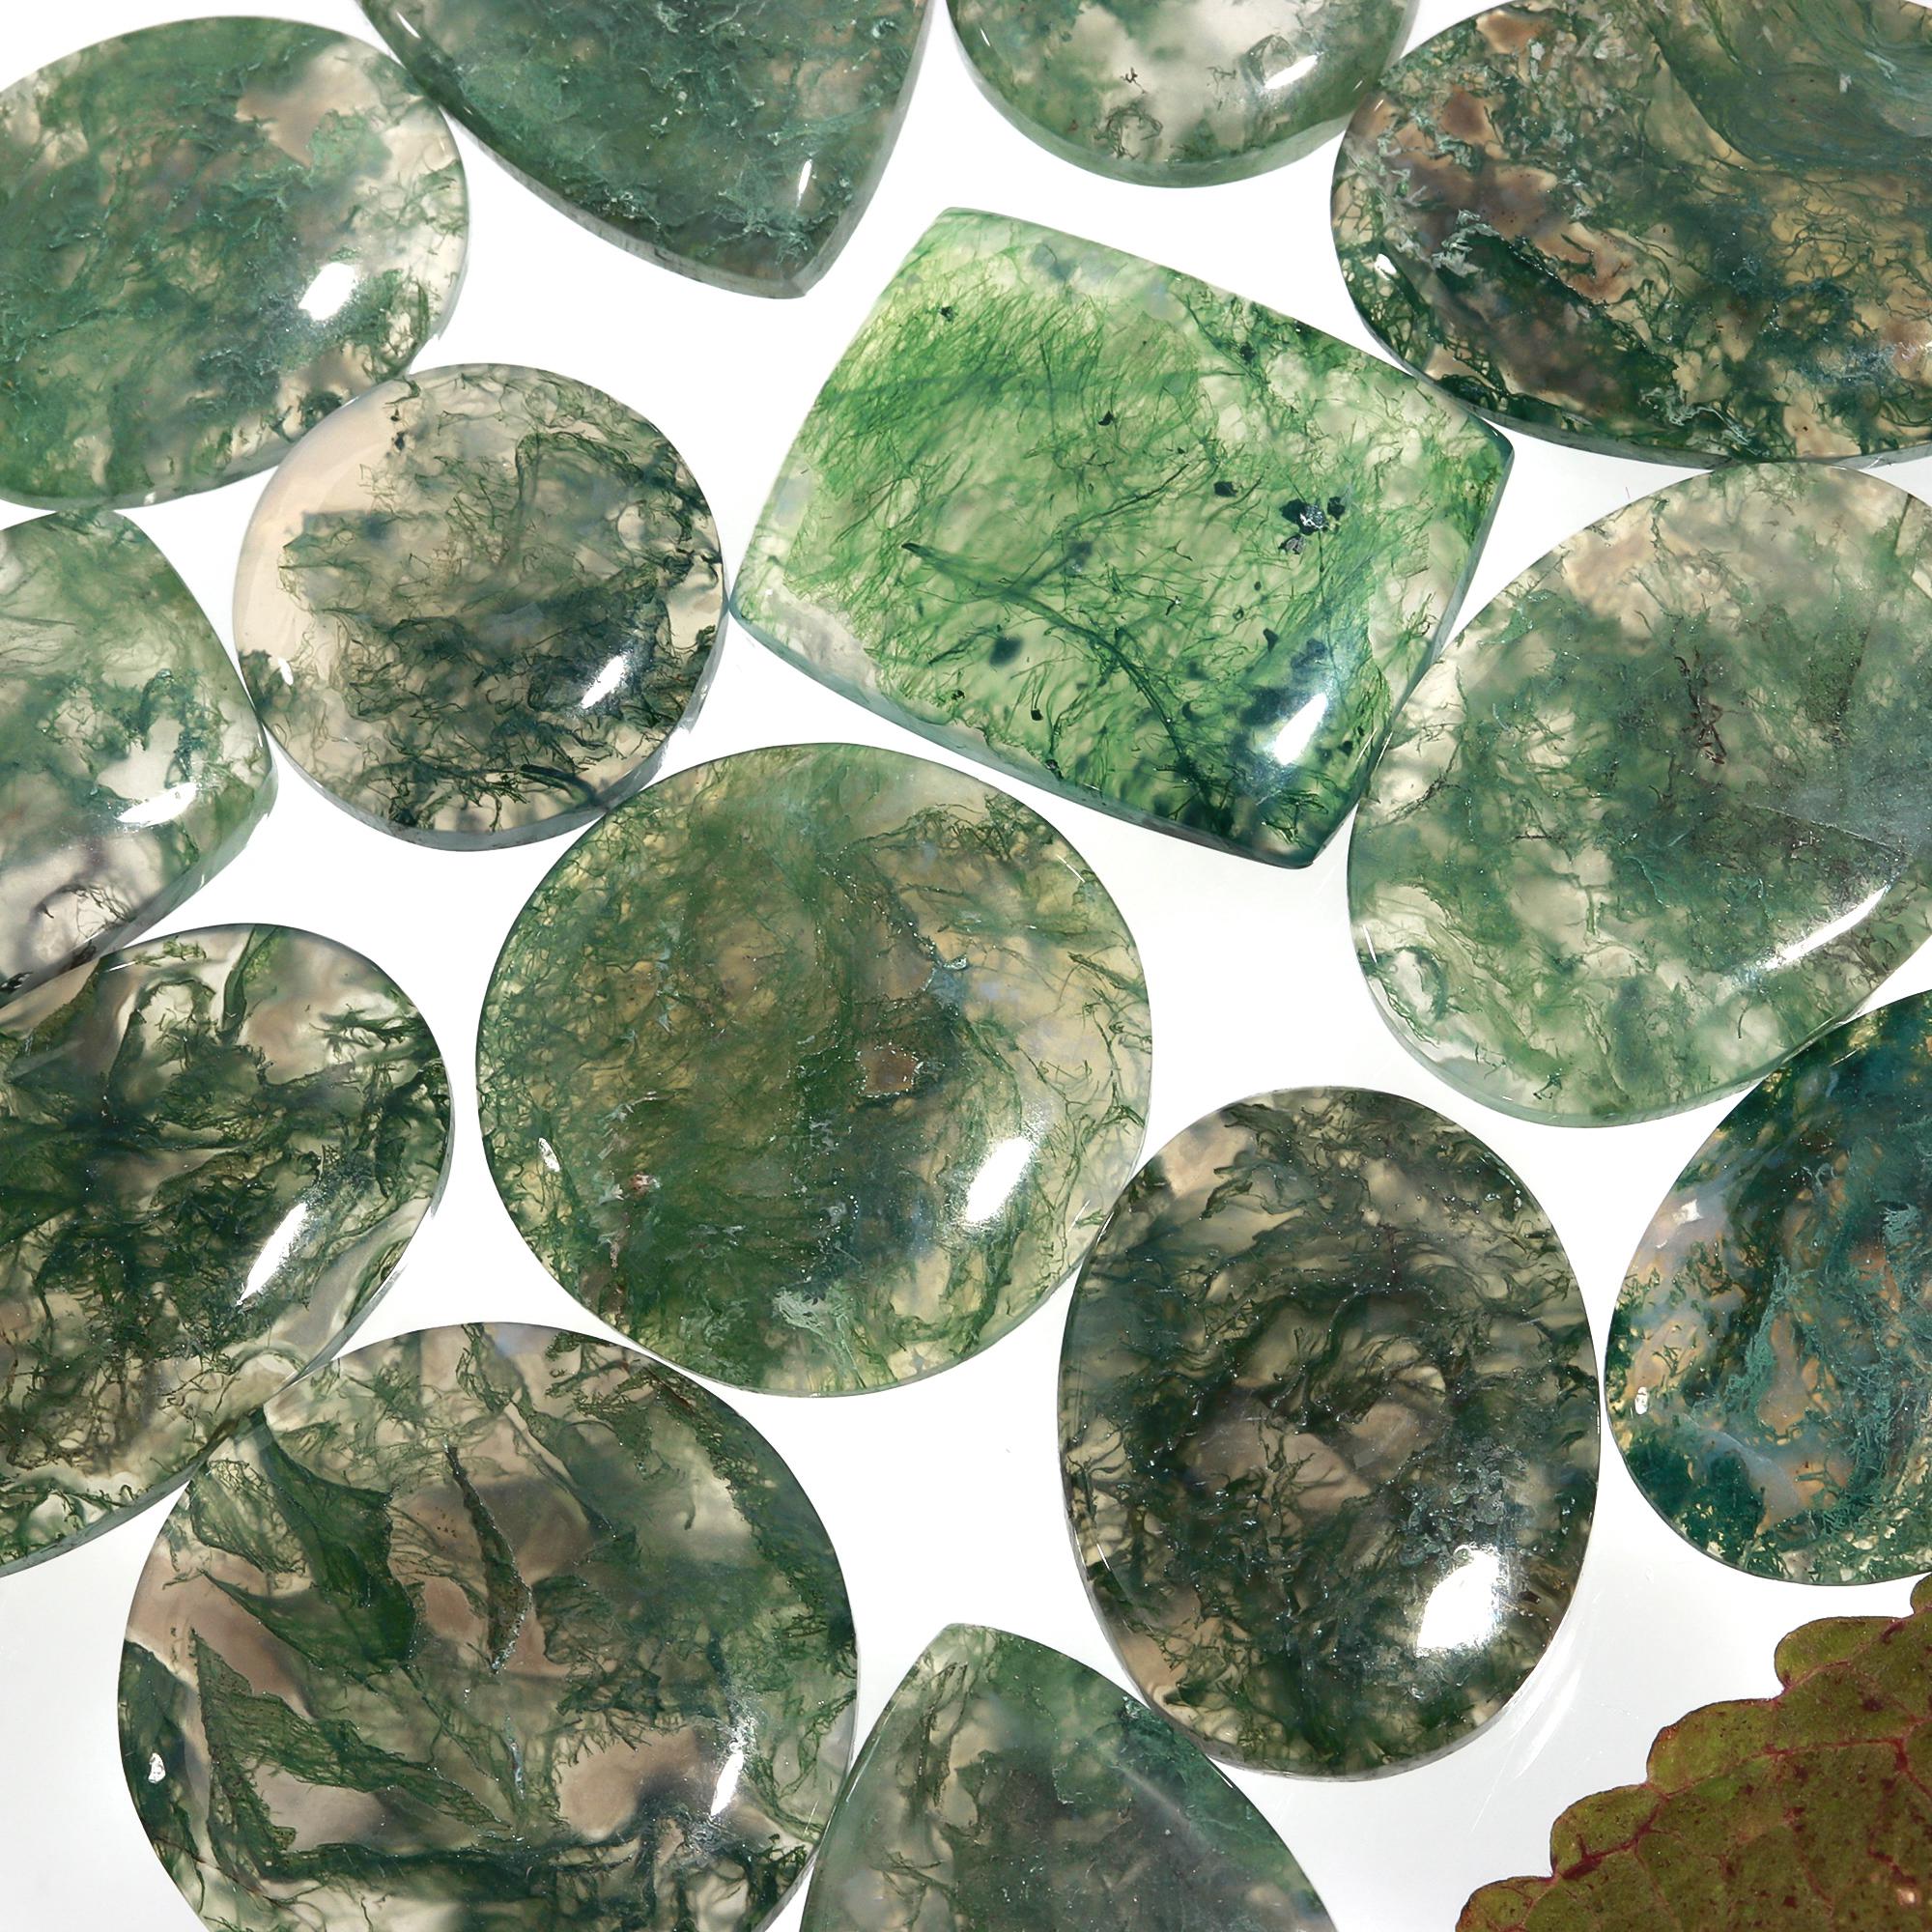 14Pcs lot 281Cts Natural Green Moss Agate Cabochon Lots Mixed Shapes And Sizes Moss Agate loose gemstone Cabochon Wholesale Lot 24x24 16x16mm